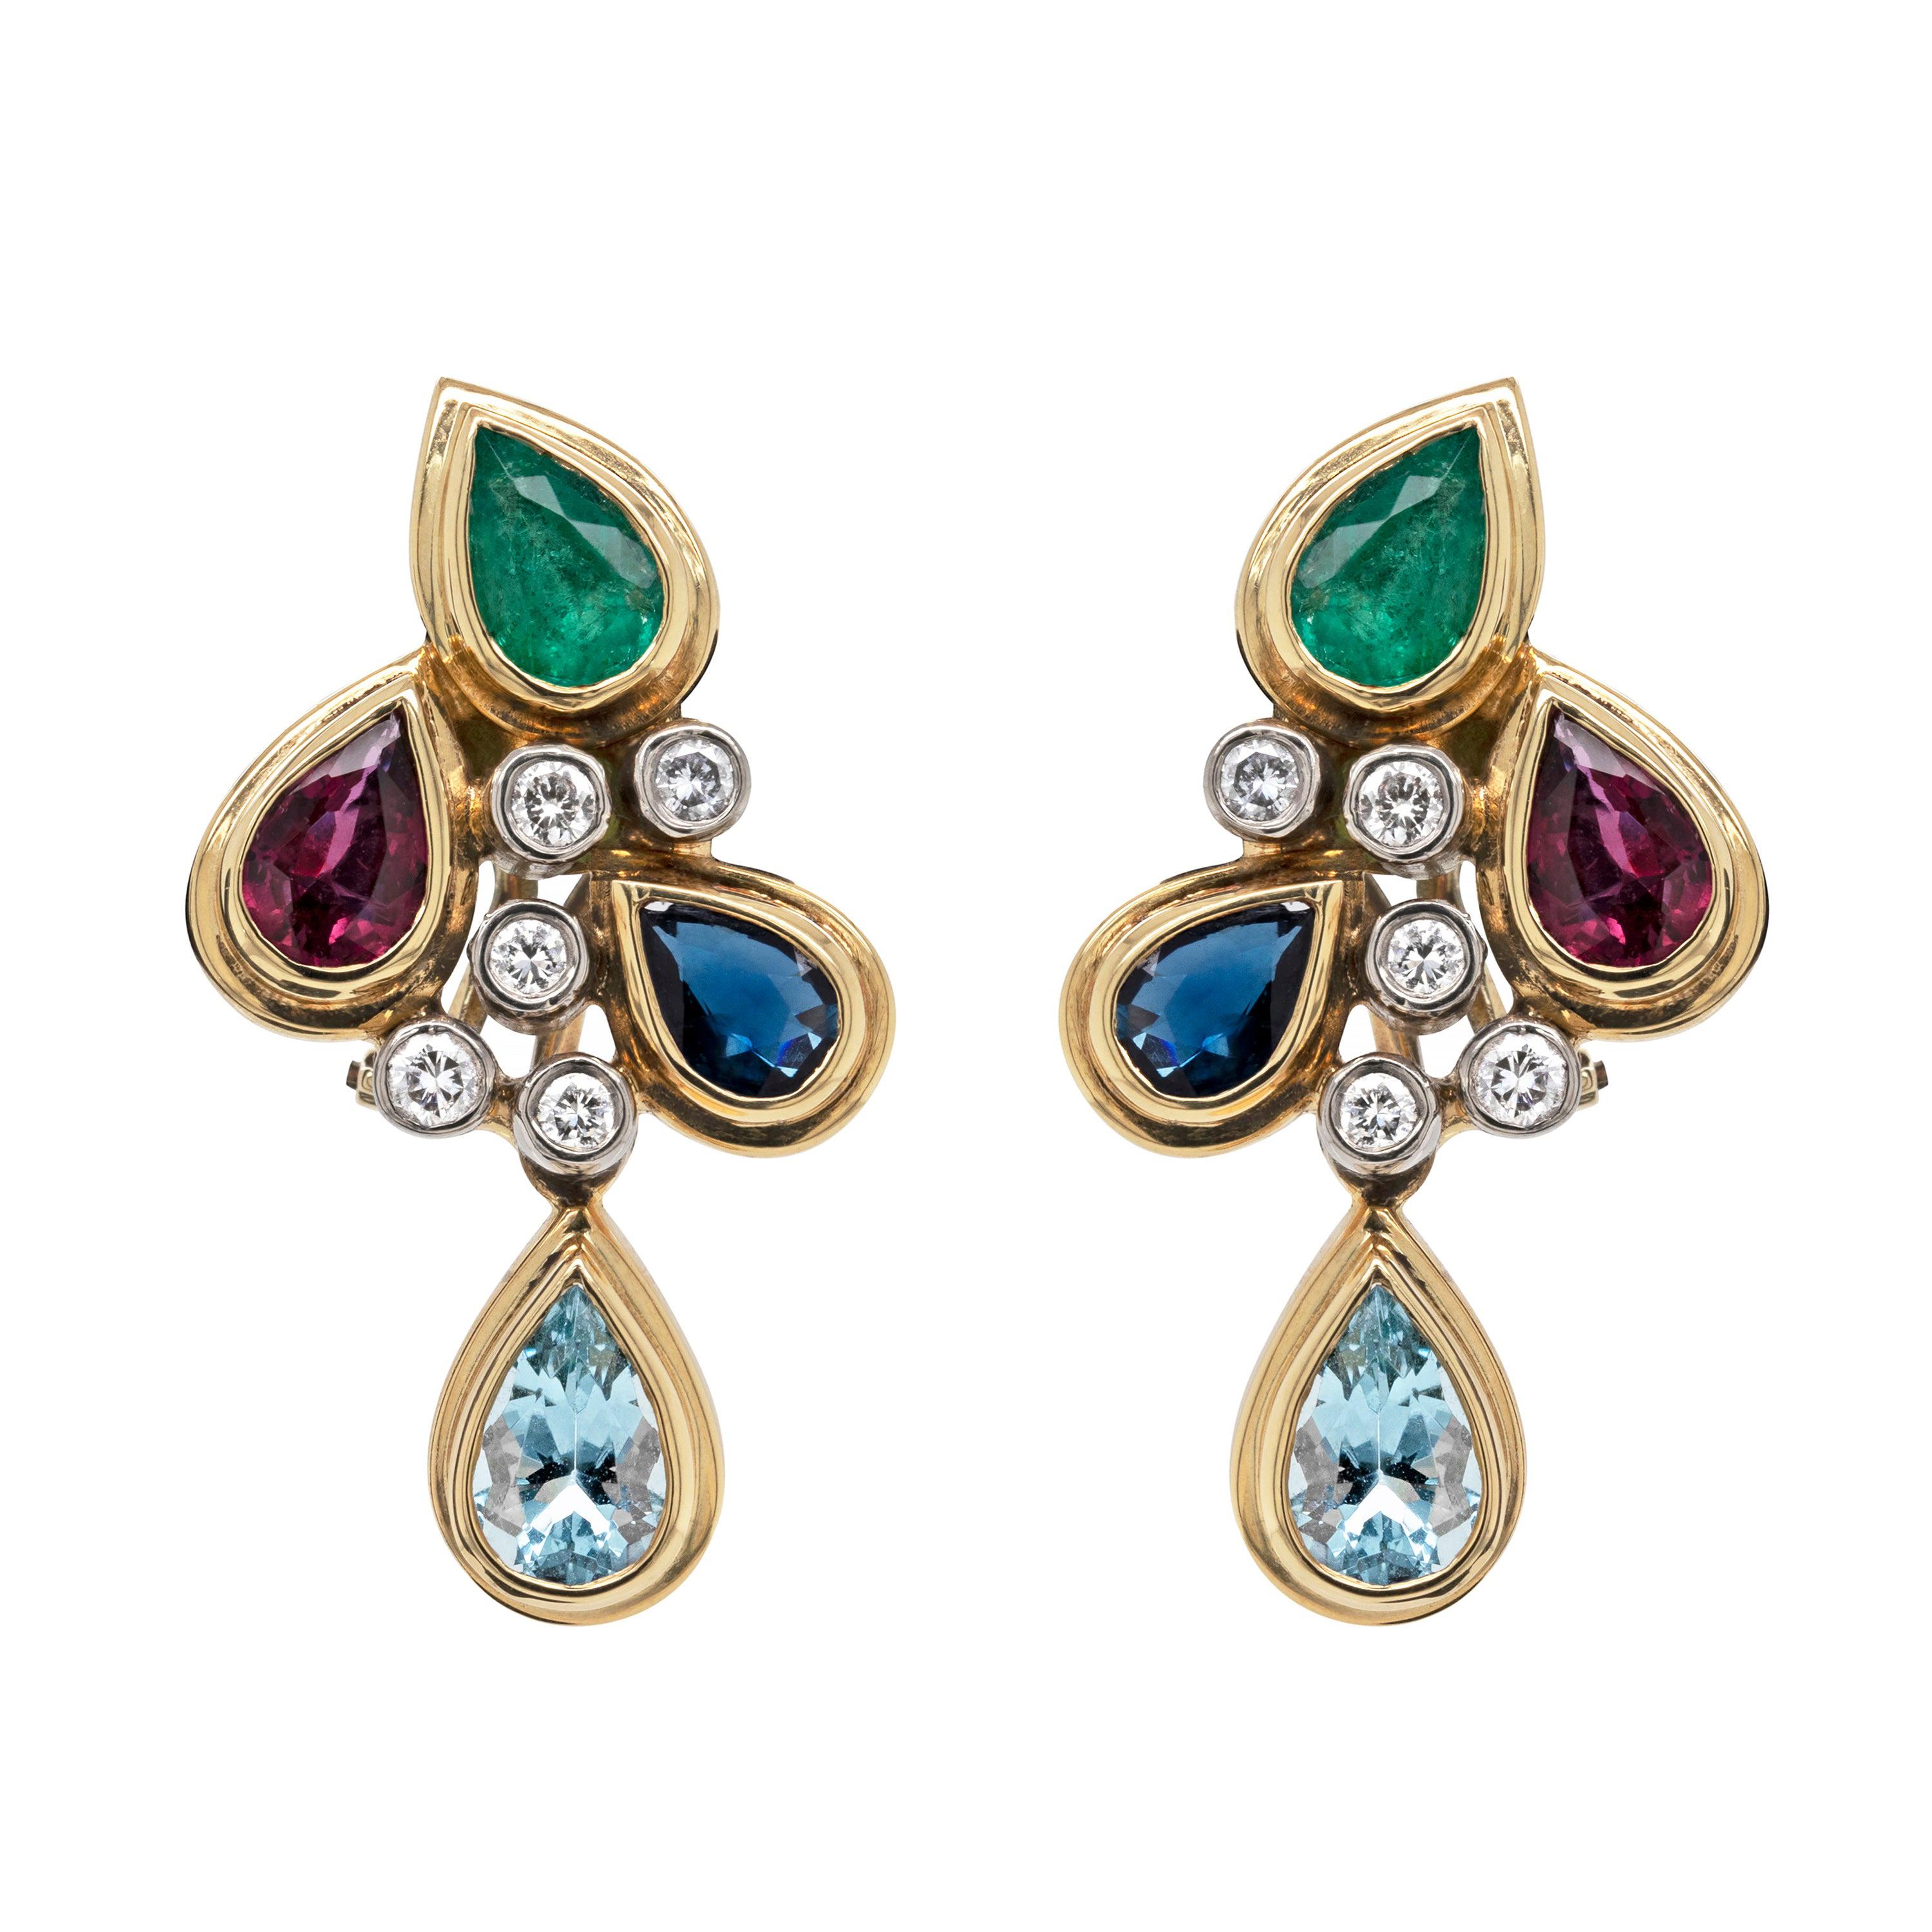 Emerald, Sapphire, Ruby, Aquamarine and Diamond 18ct Gold Cluster Earrings